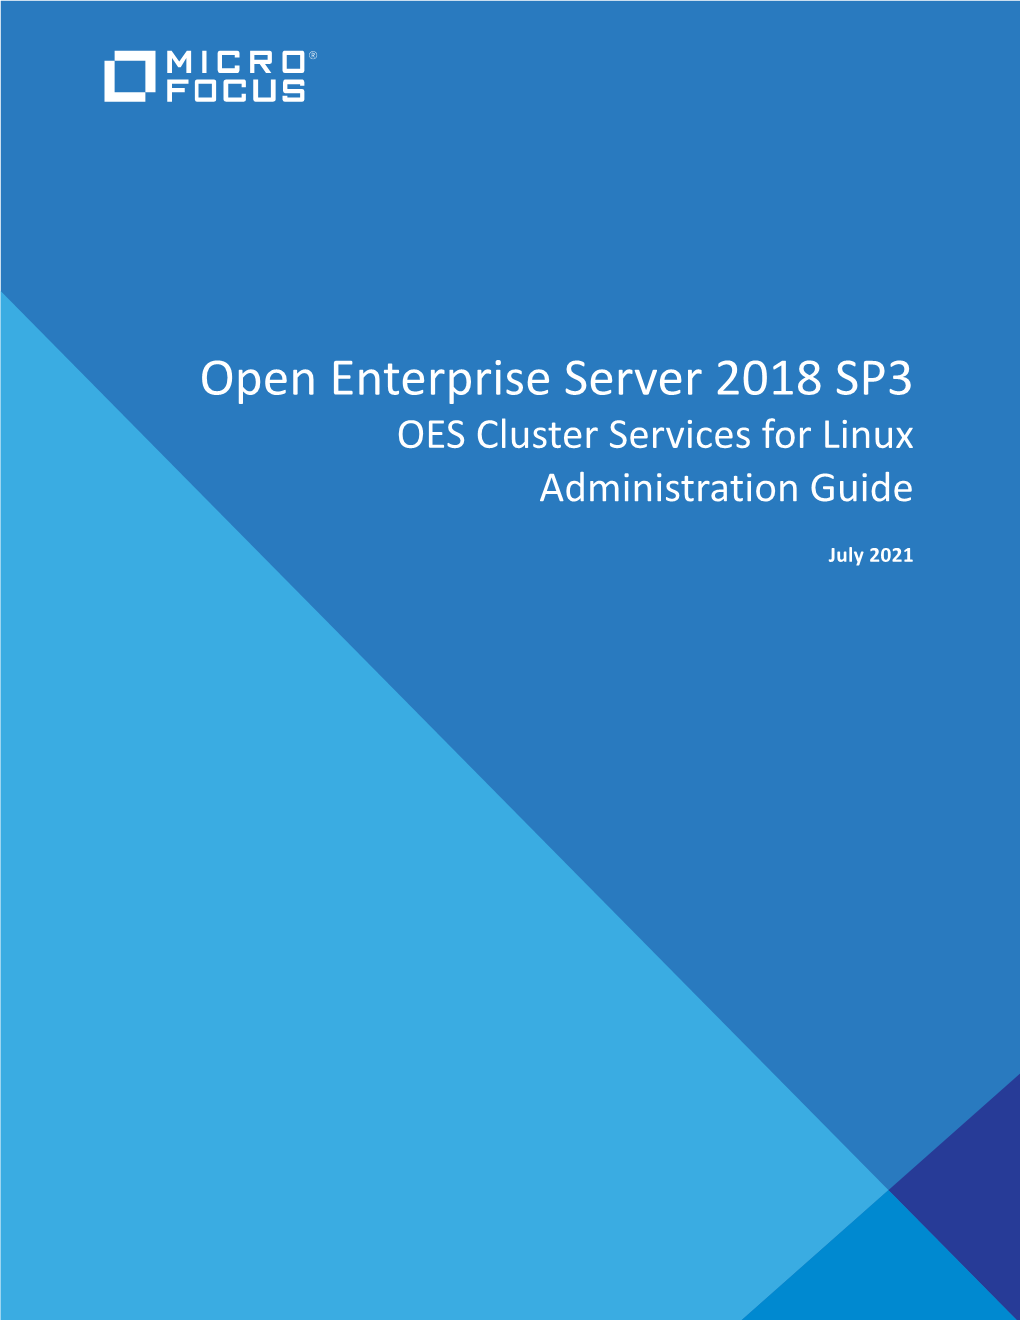 OES 2018 SP3: OES Cluster Services for Linux Administration Guide